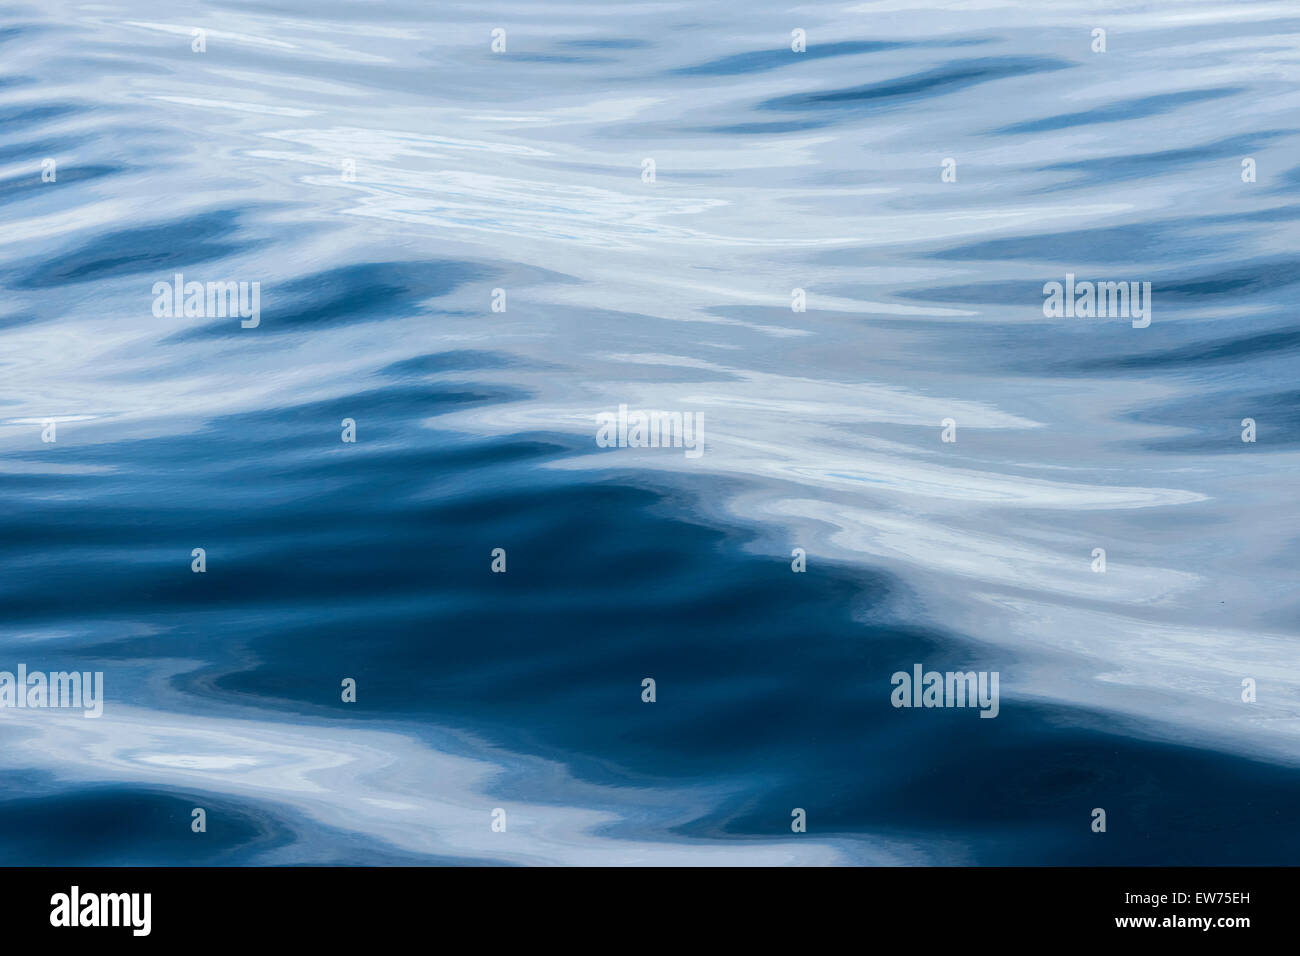 Wave, surface of the sea, Denmark Strait, Greenland Stock Photo